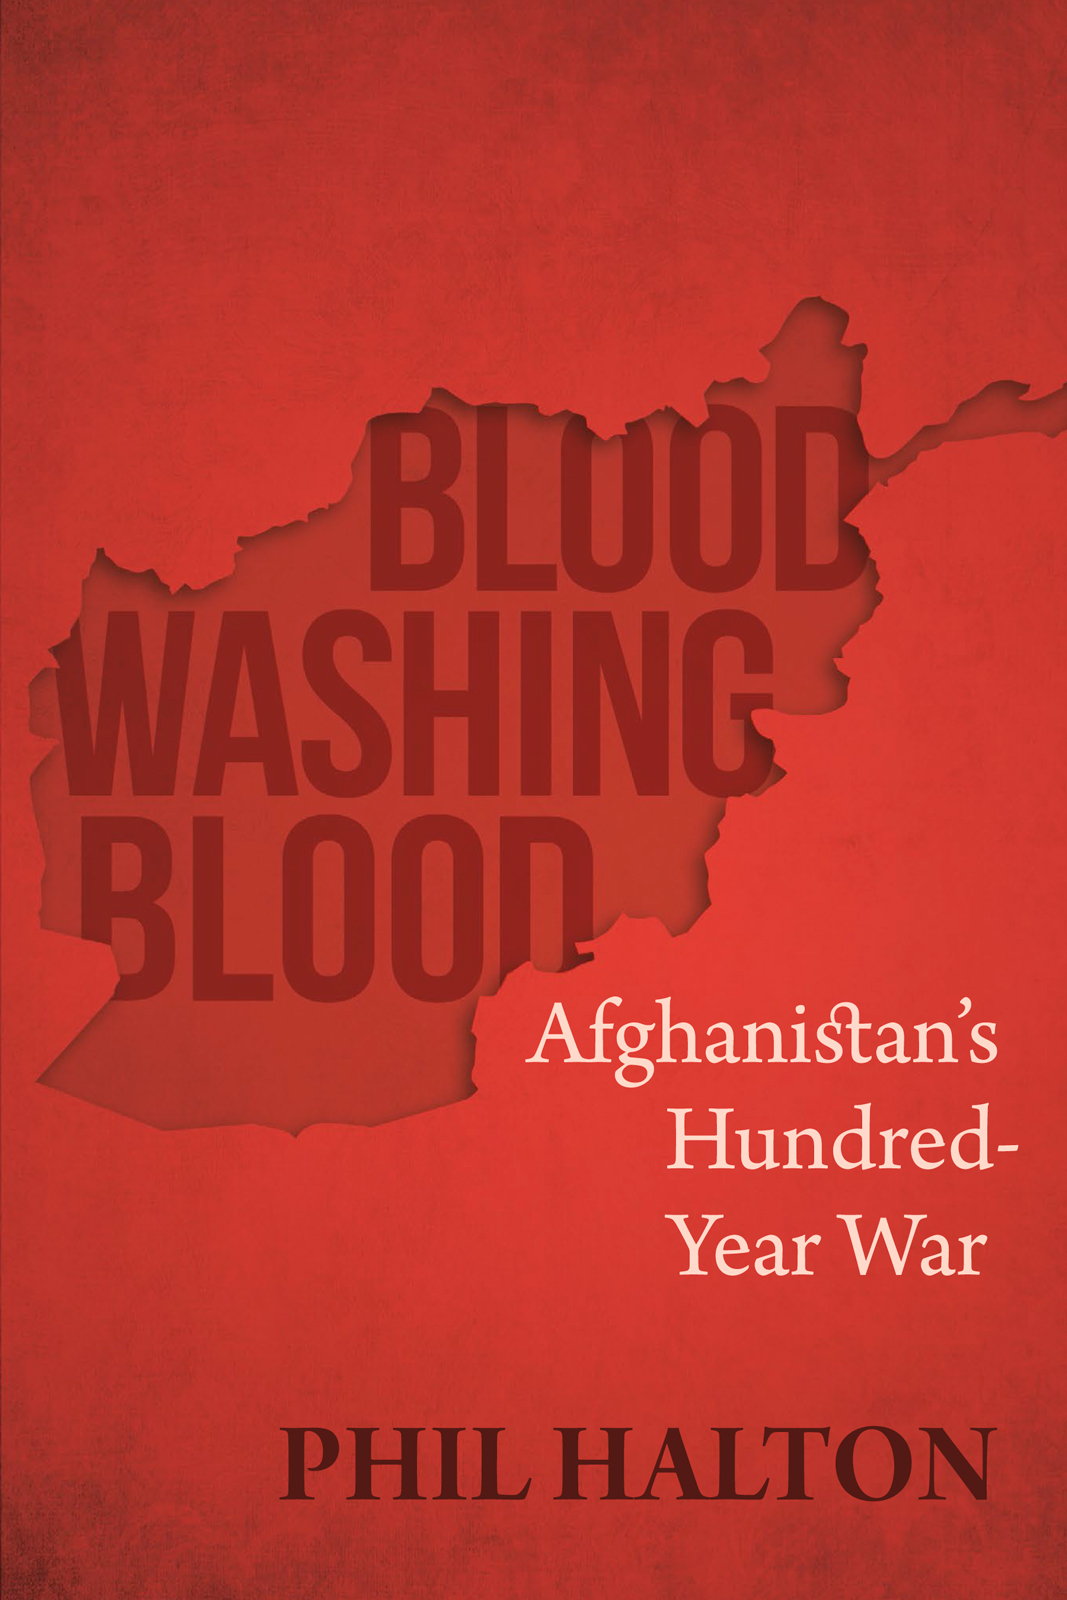 PRAISE FOR BLOOD WASHING BLOOD A curious fact about the Afghan war is that - photo 1